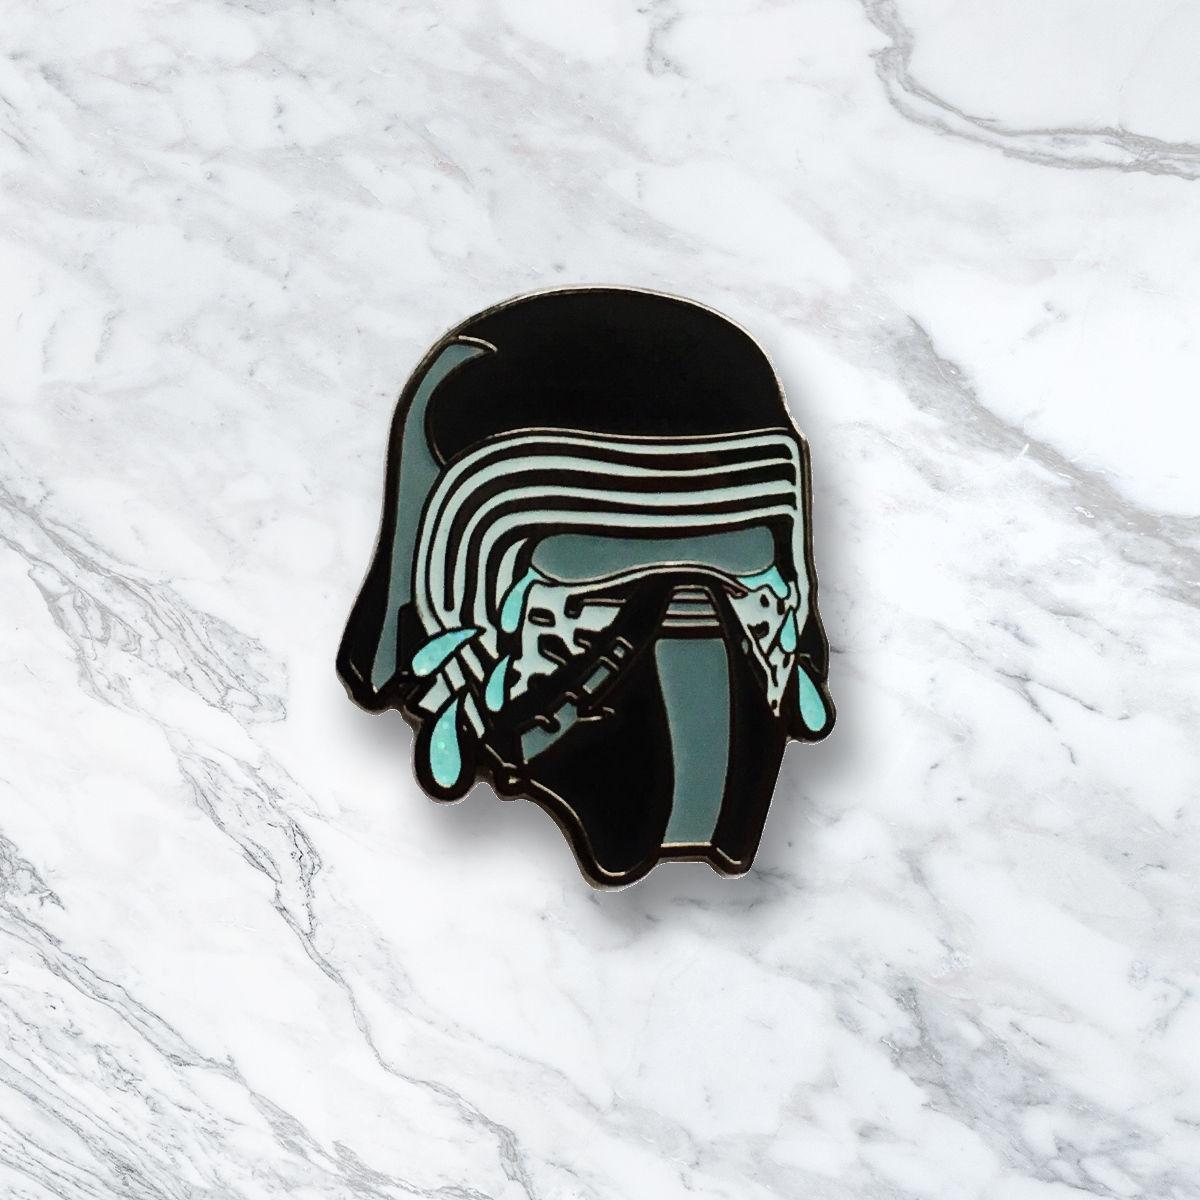 Crylo Ren Pin From Pinlord